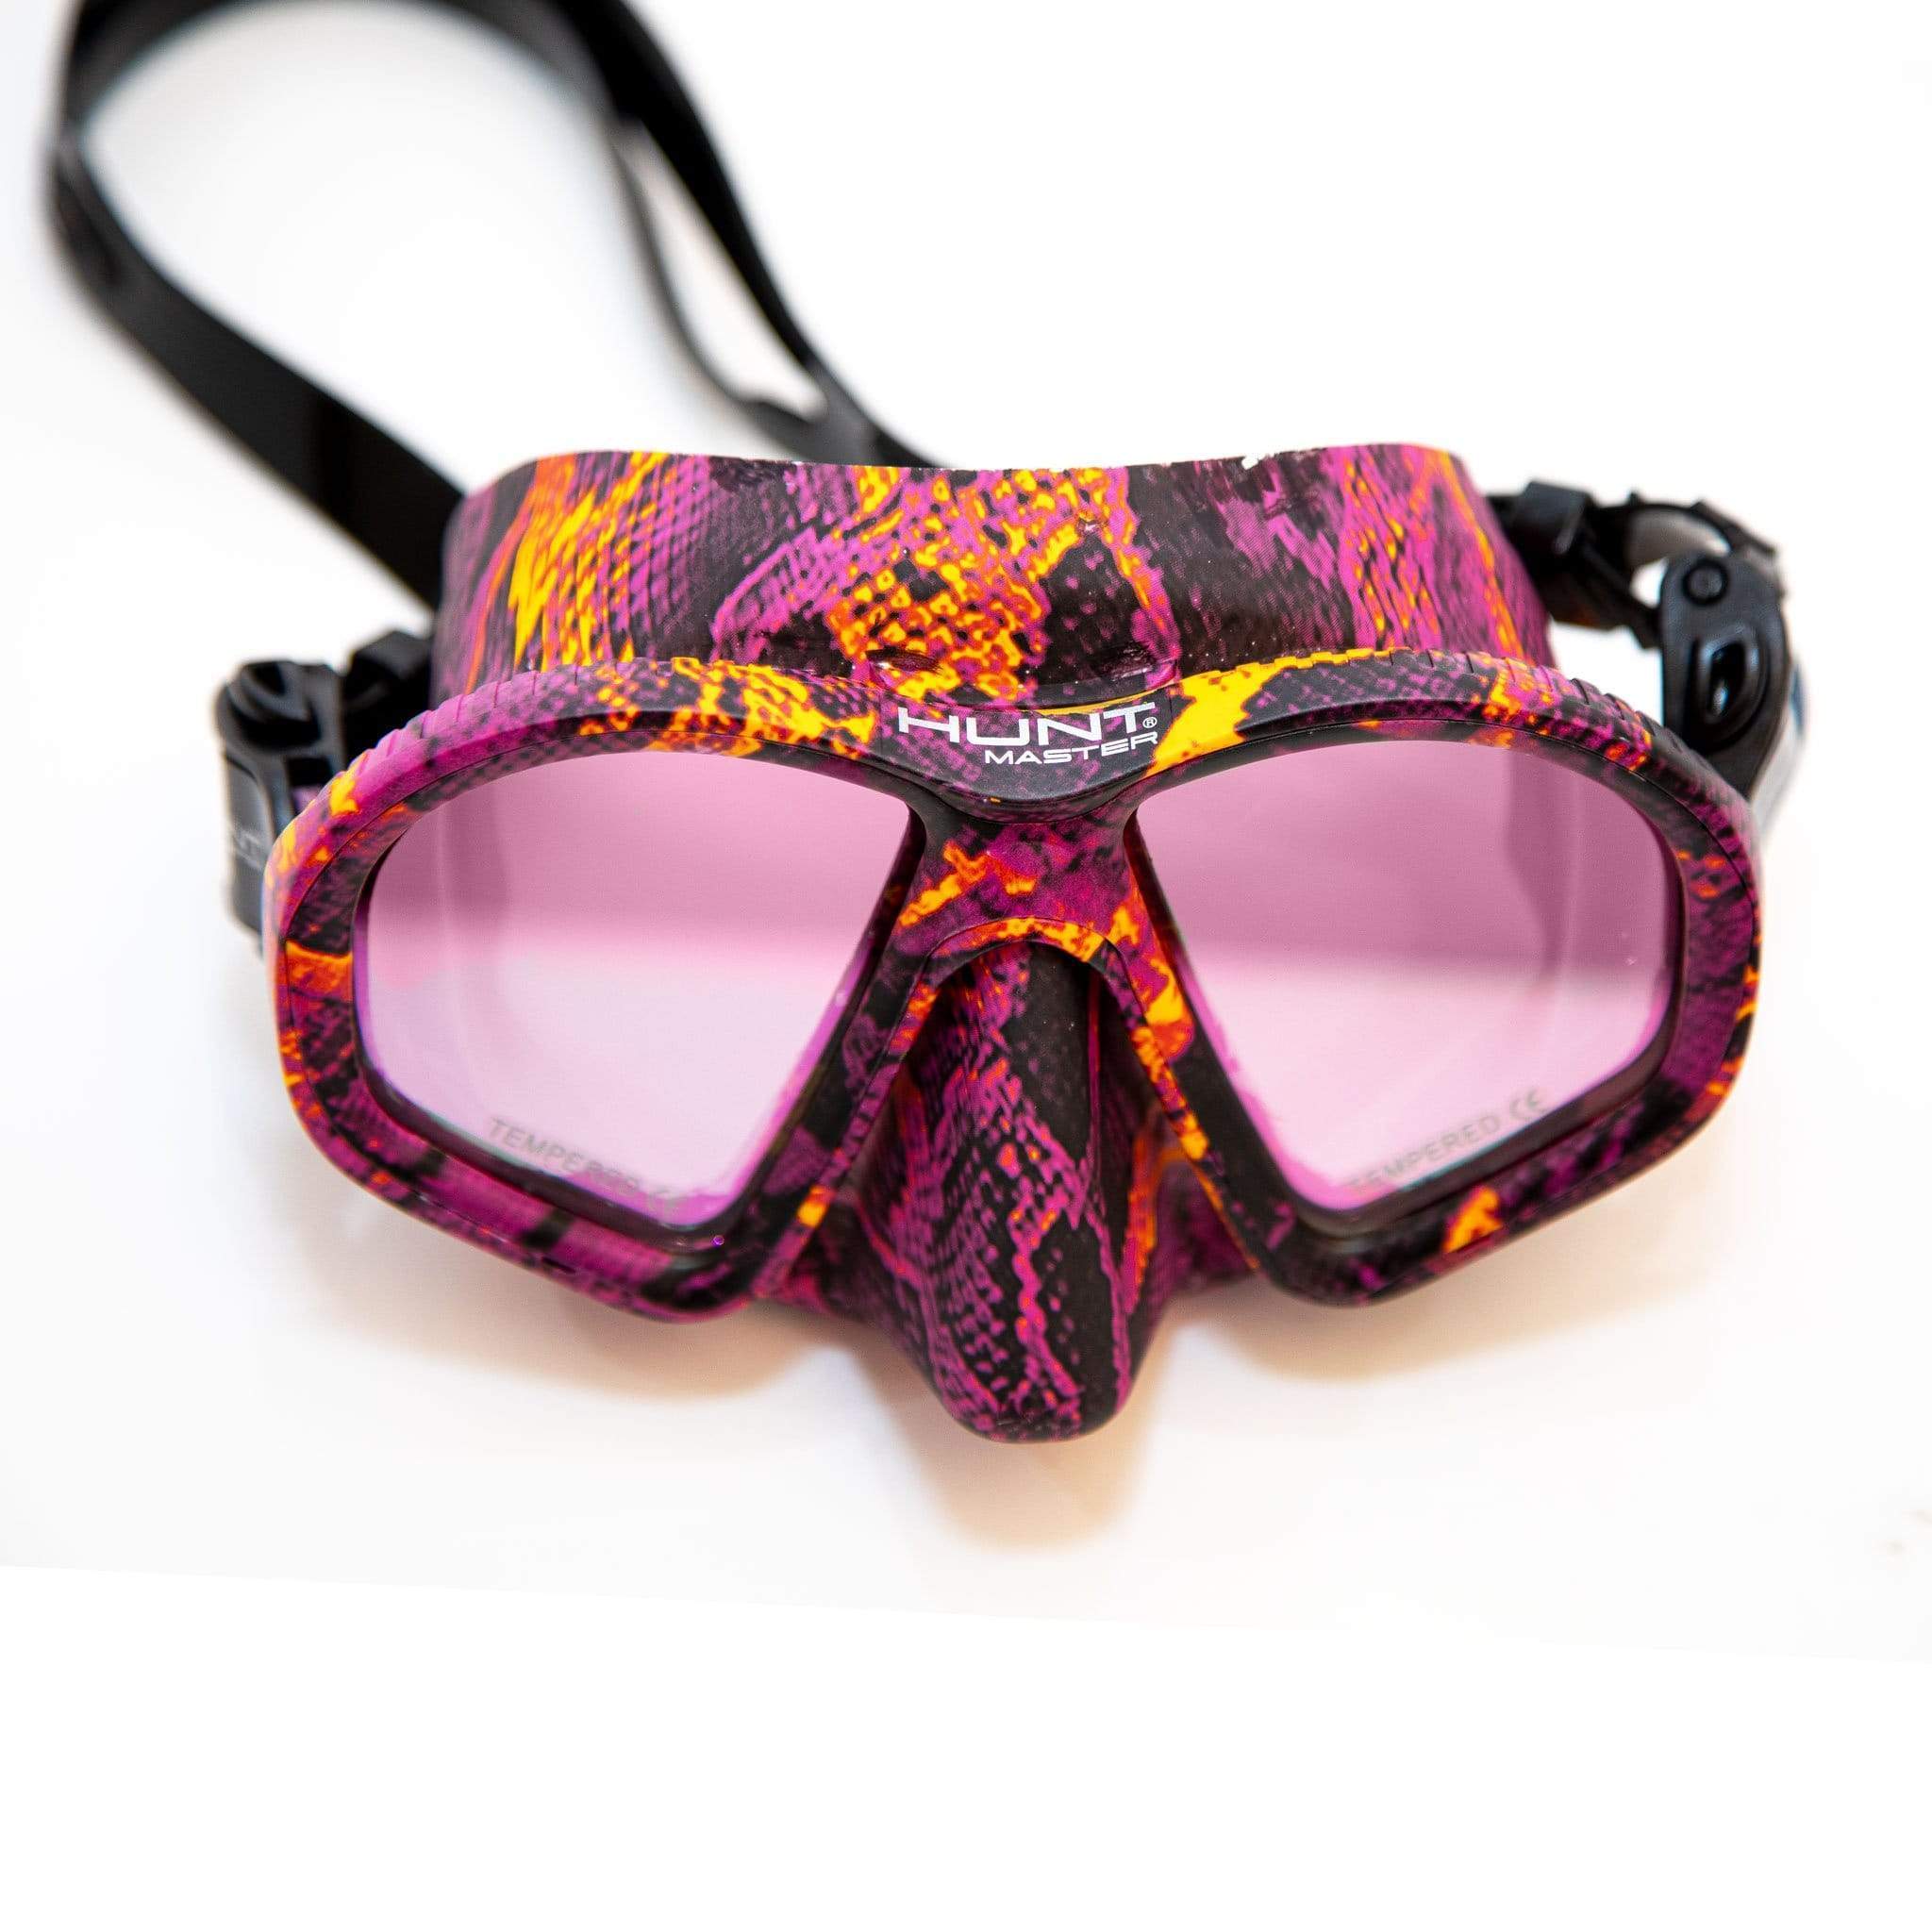 HuntMaster Pink Harbinger Camo Diving Mask (Huntress)- With Matching Camo Container (Pink)